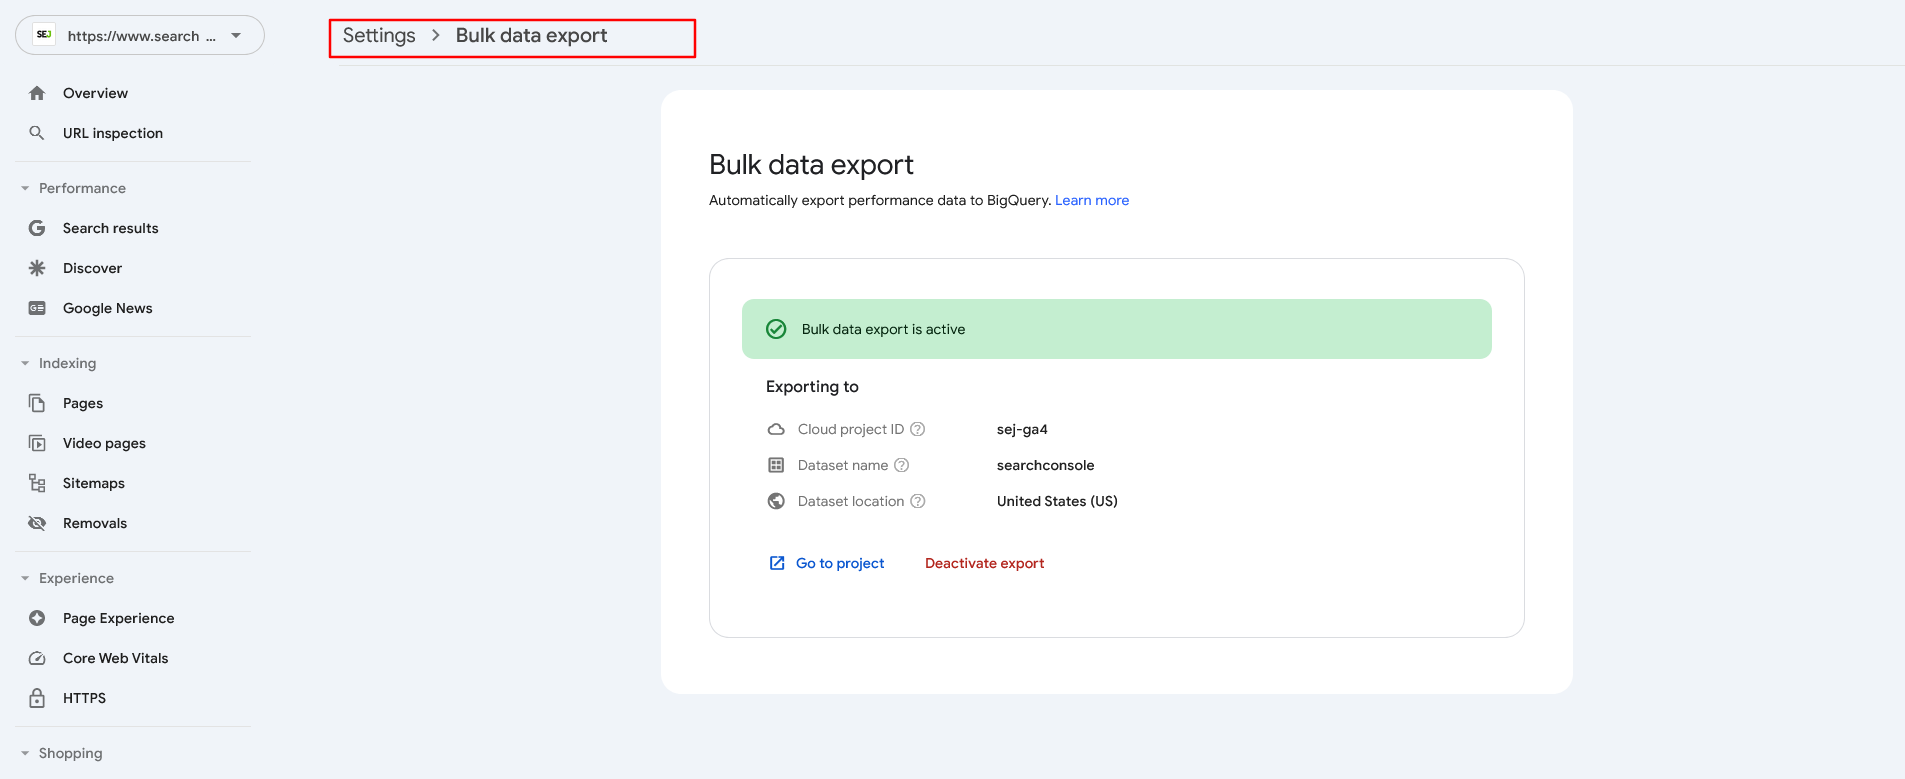 bulk data export 949 - Google Search Console Complete Guide For SEO